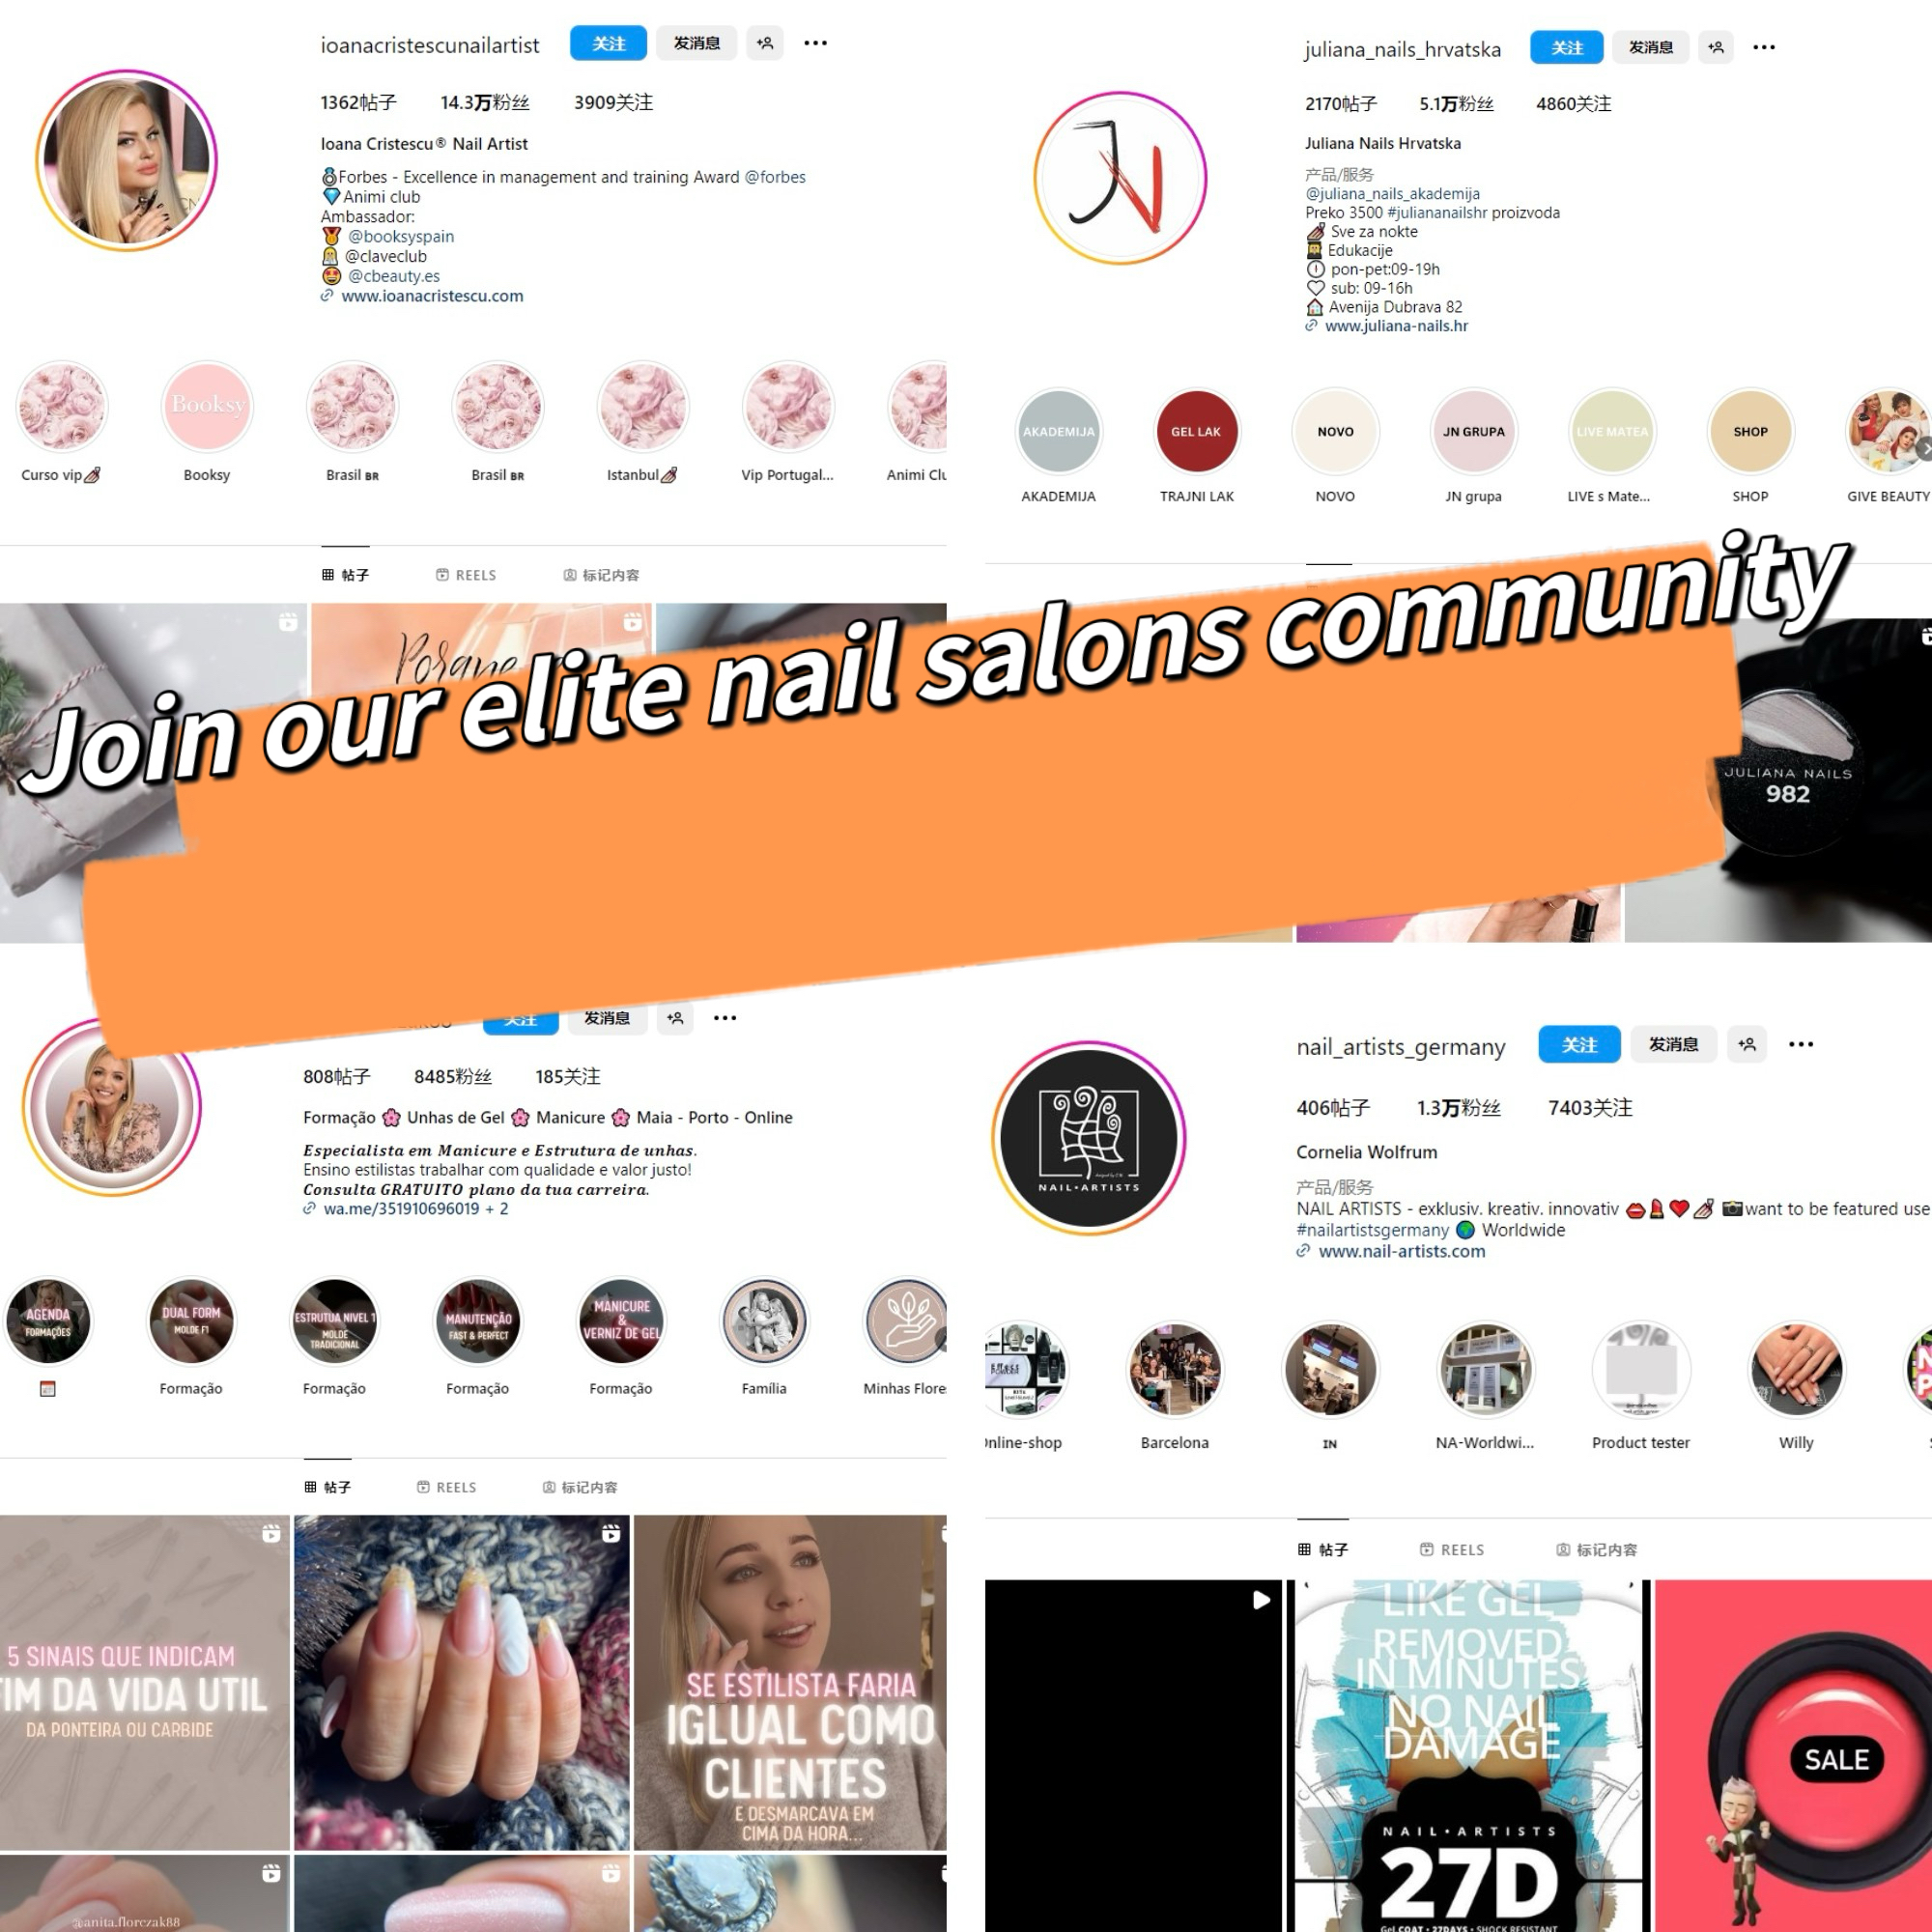 join our elite nailart salons community, created by wholesale nailart brush supplier